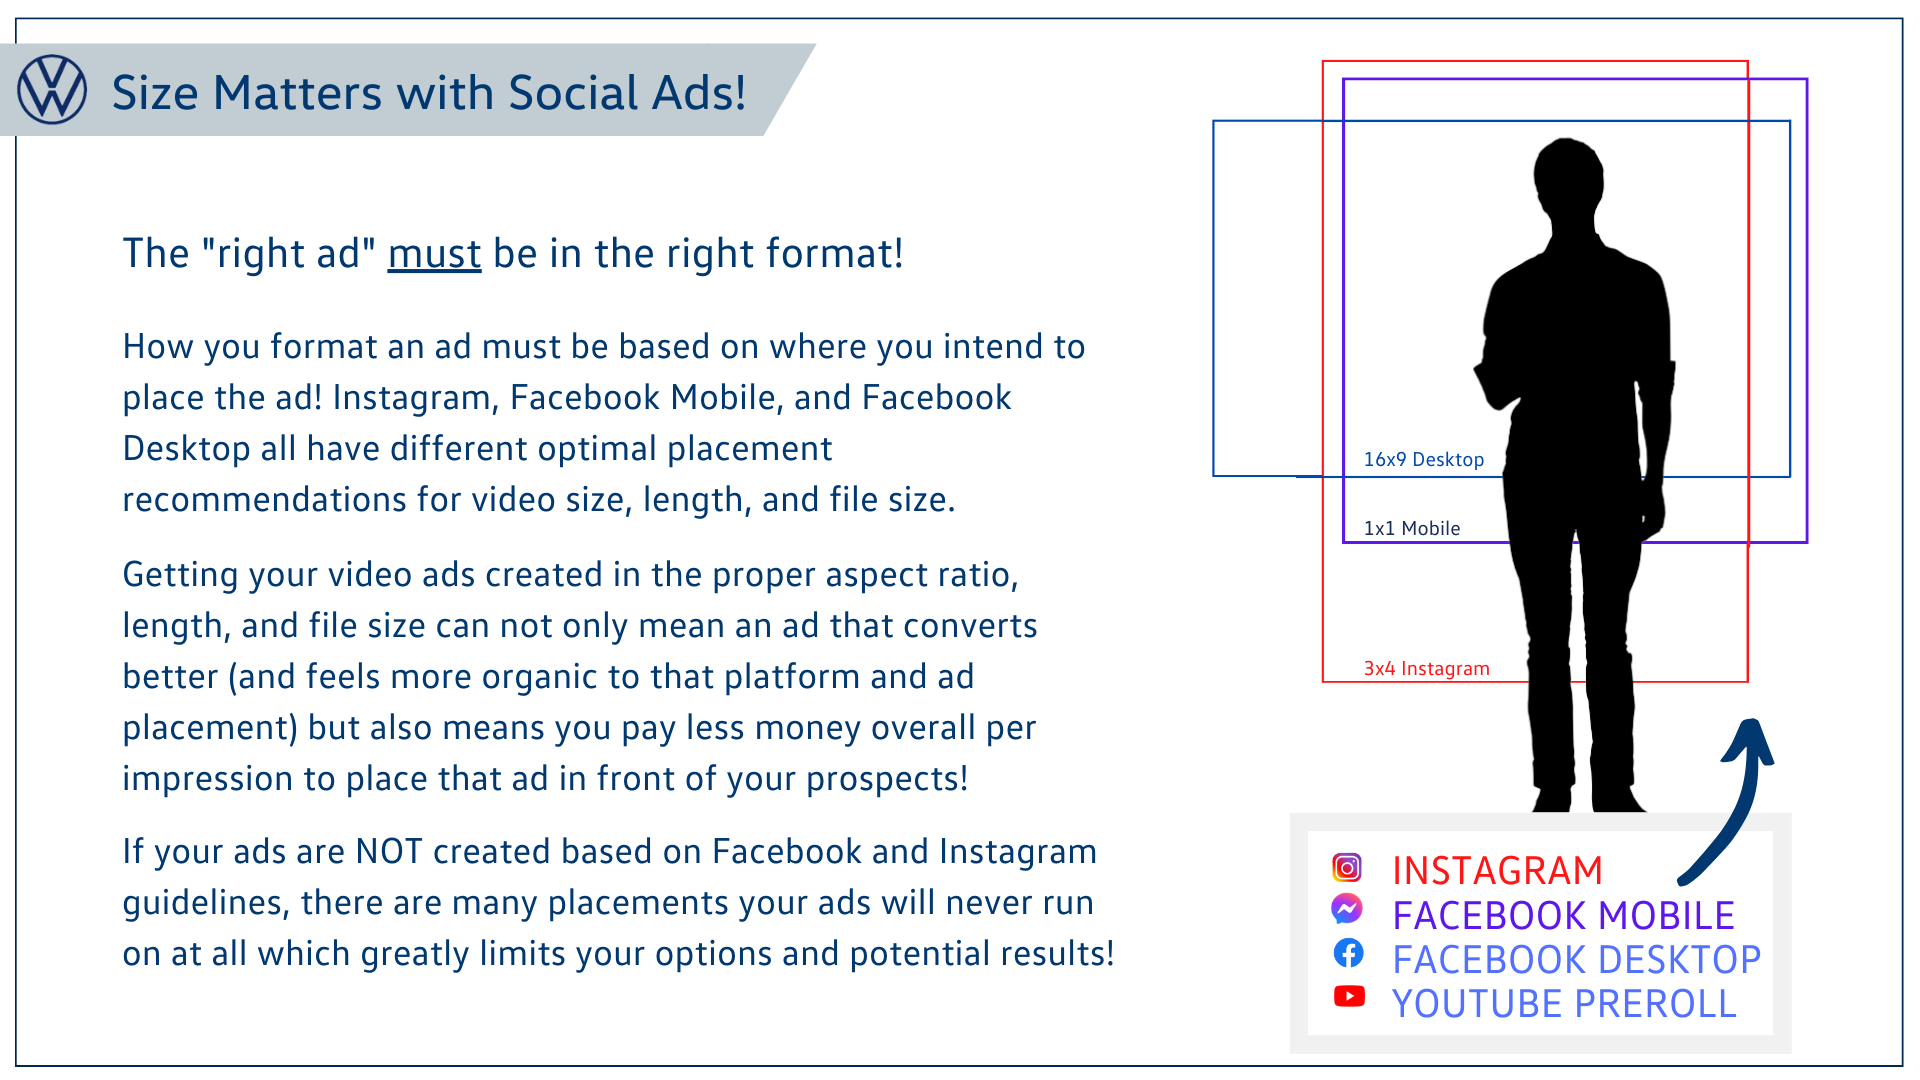 Size matters with social ads